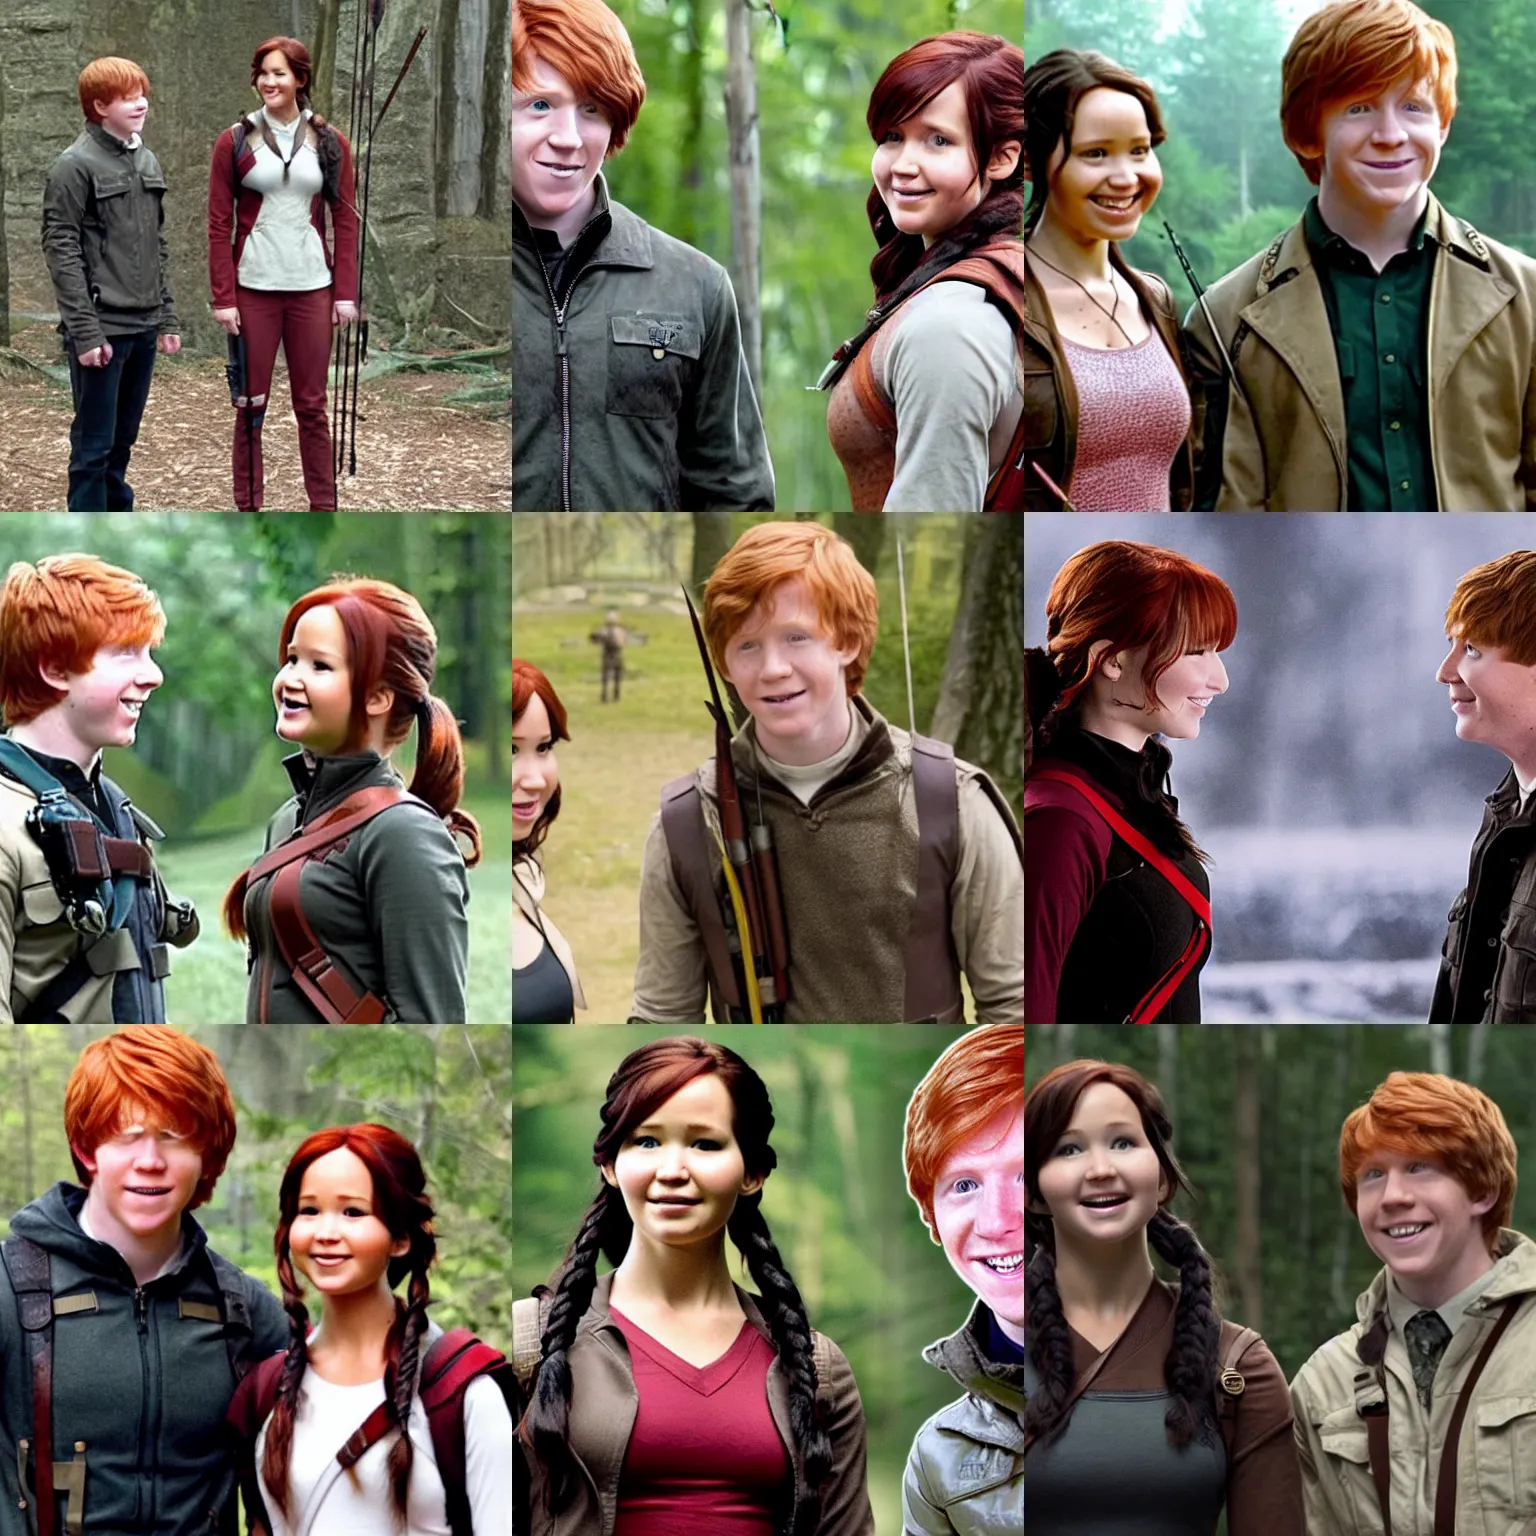 Prompt: Katniss Everdeen standing next to Ron Weasley, both smiling for the camera, film still from Harry Potter and the Philospher's Stone